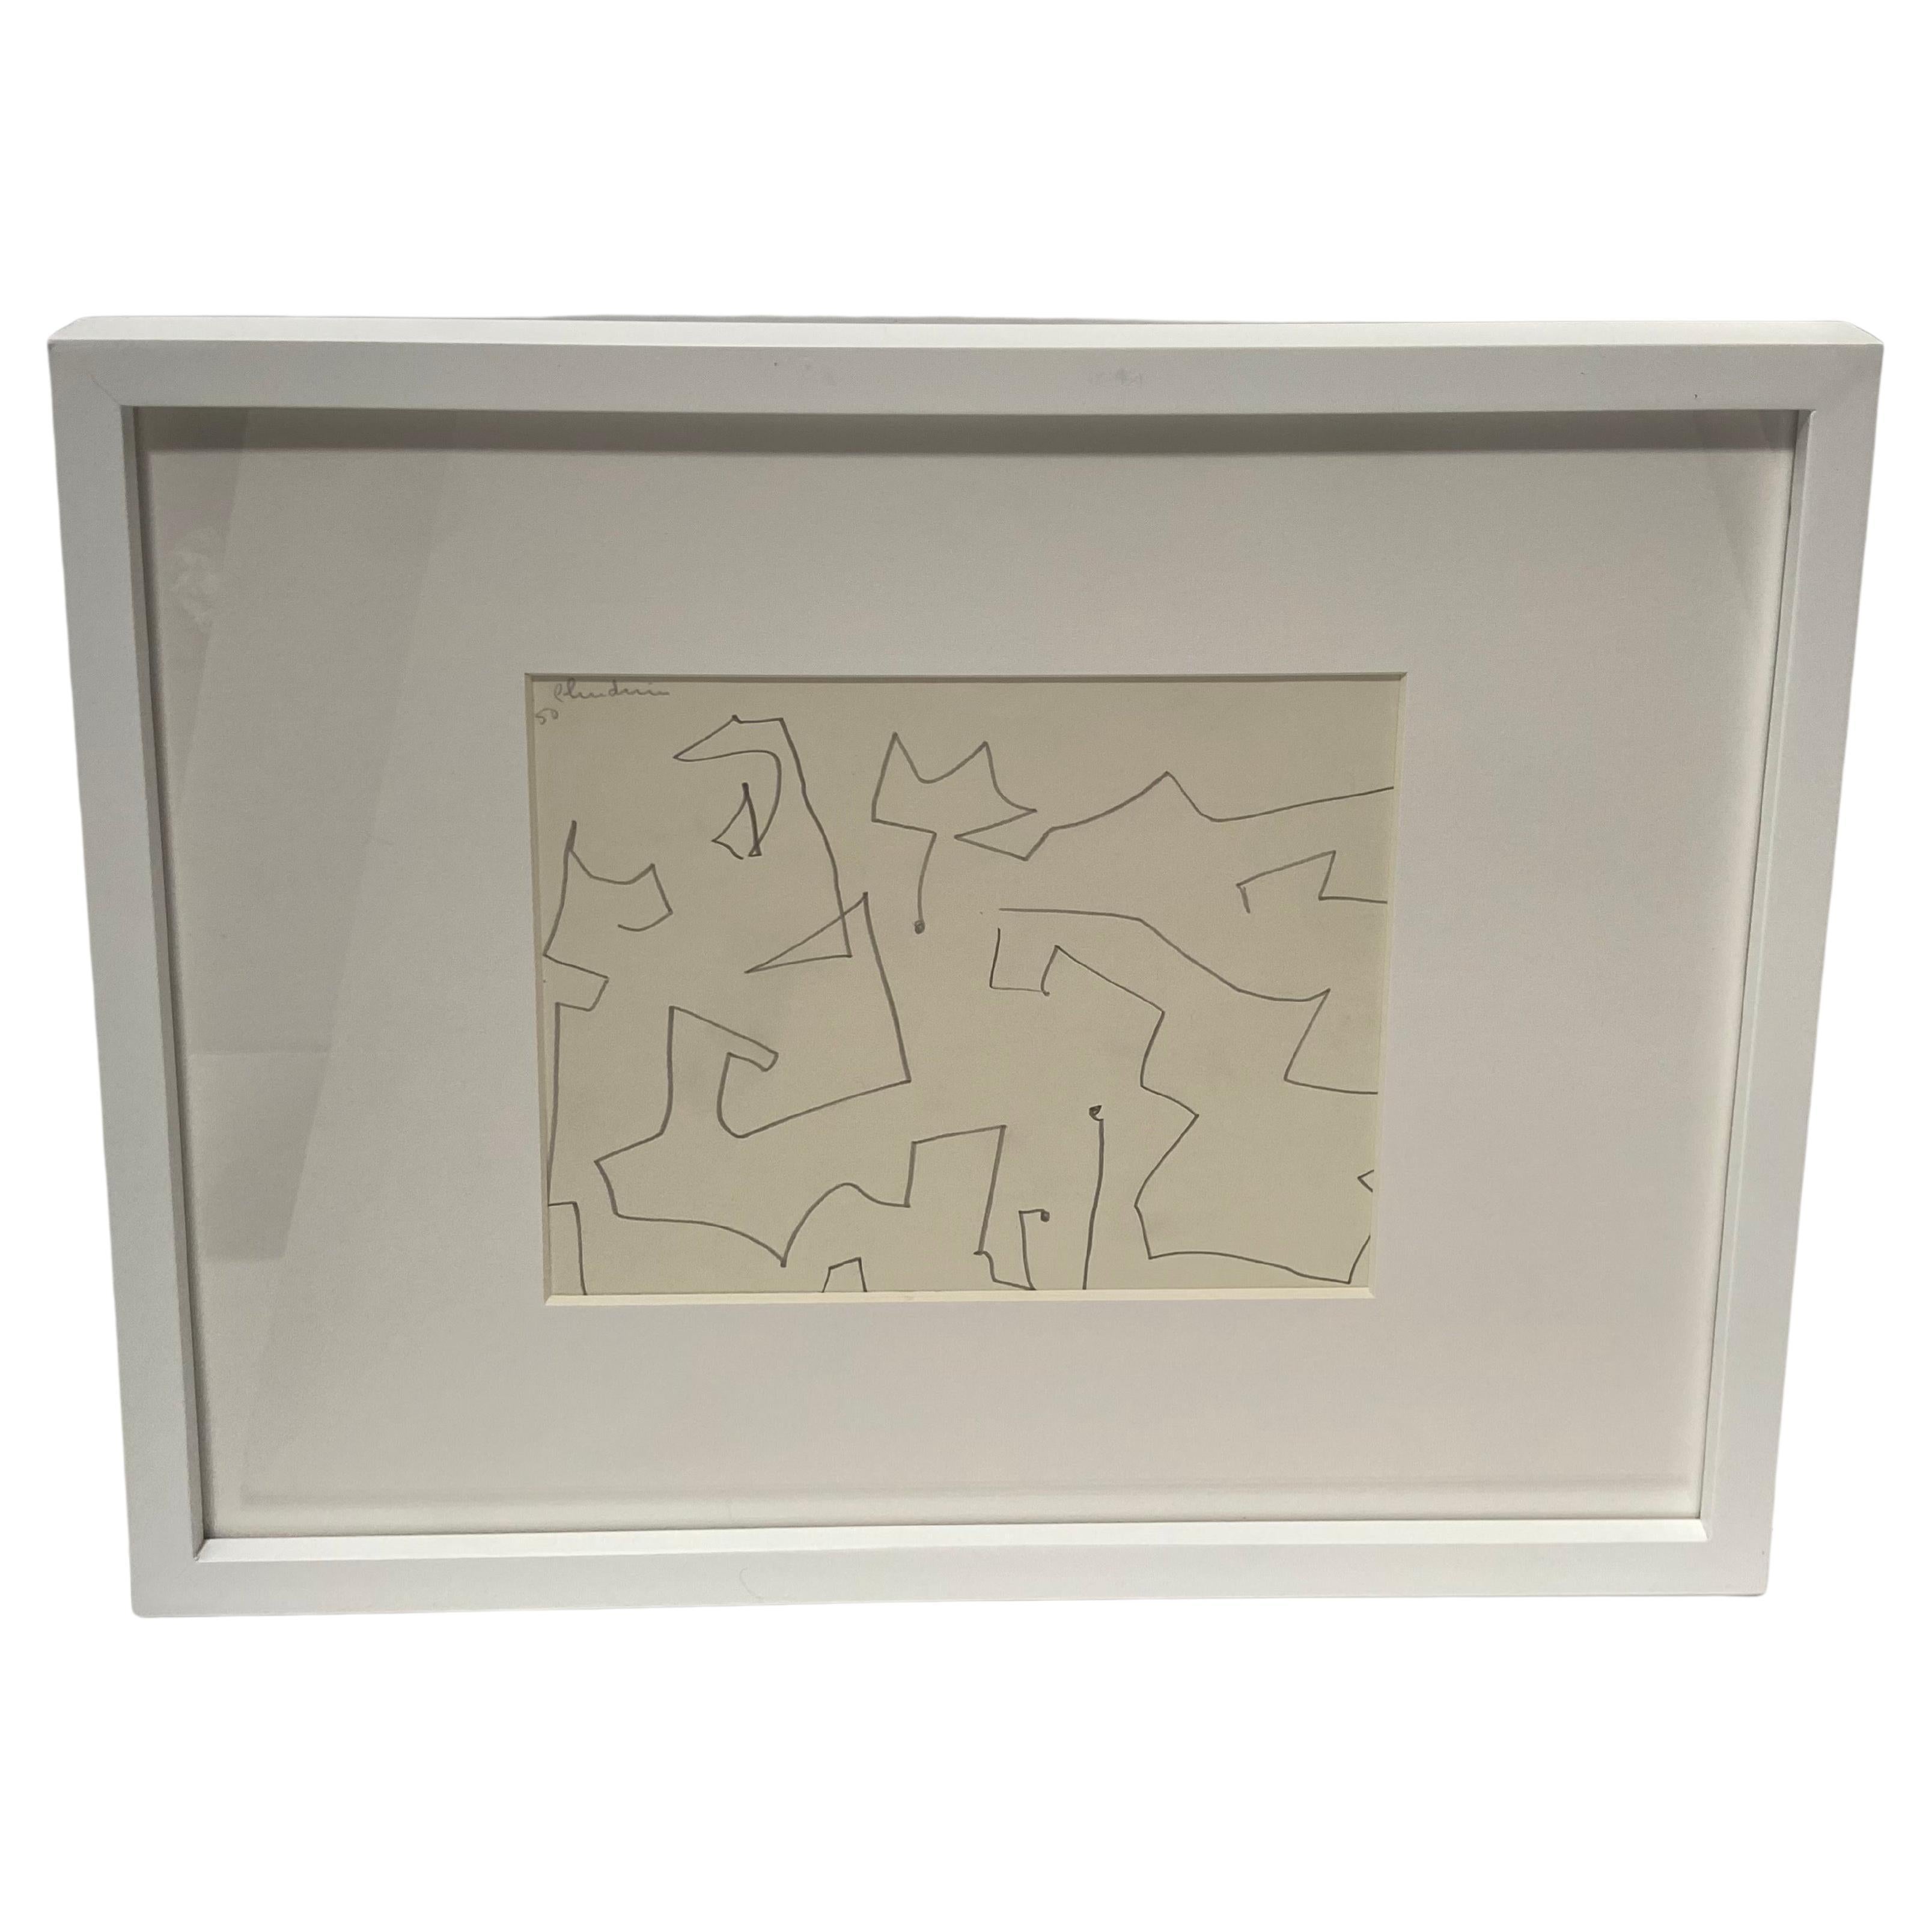 1950 Abstract Geometric Drawing in Pencil on Paper by Eve Clendenin NYC, Framed